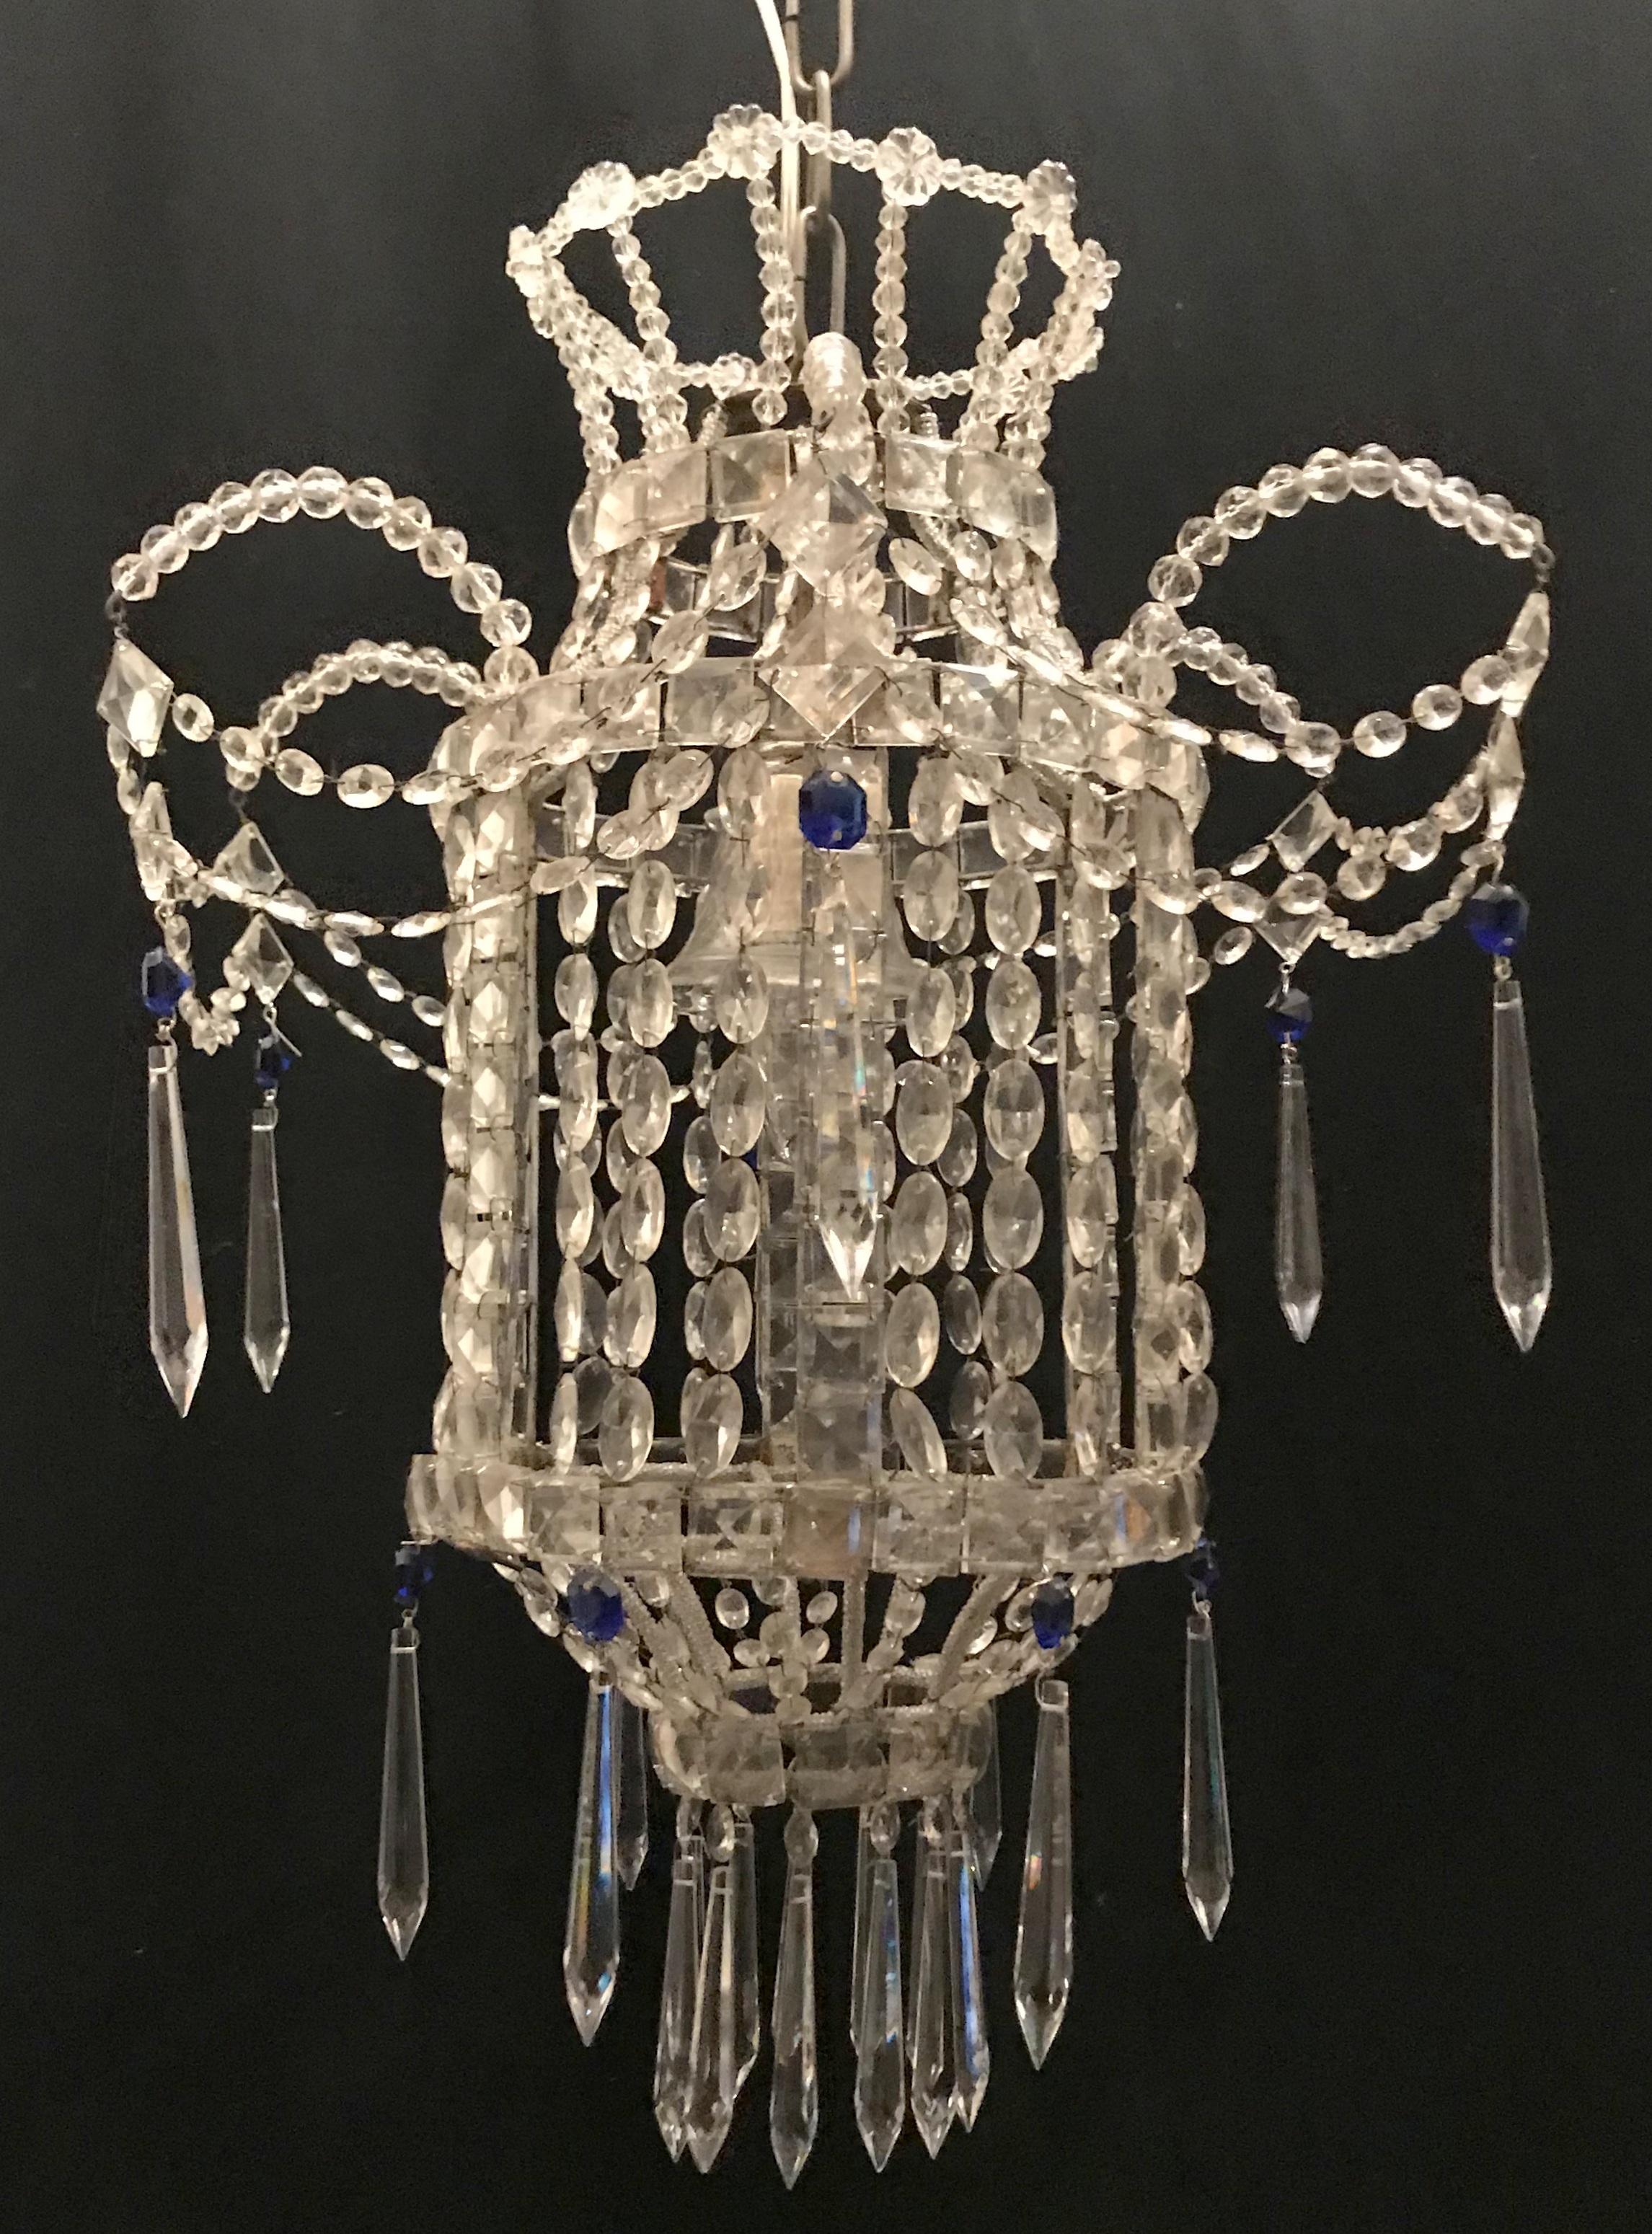 A wonderful beaded Italian Venetian pagoda form lantern with single Edison light fixture, chandelier crystal basket with draping and sapphire blue drops pendent.
Completely rewired for us and ready to install and enjoy.
Measures: 17